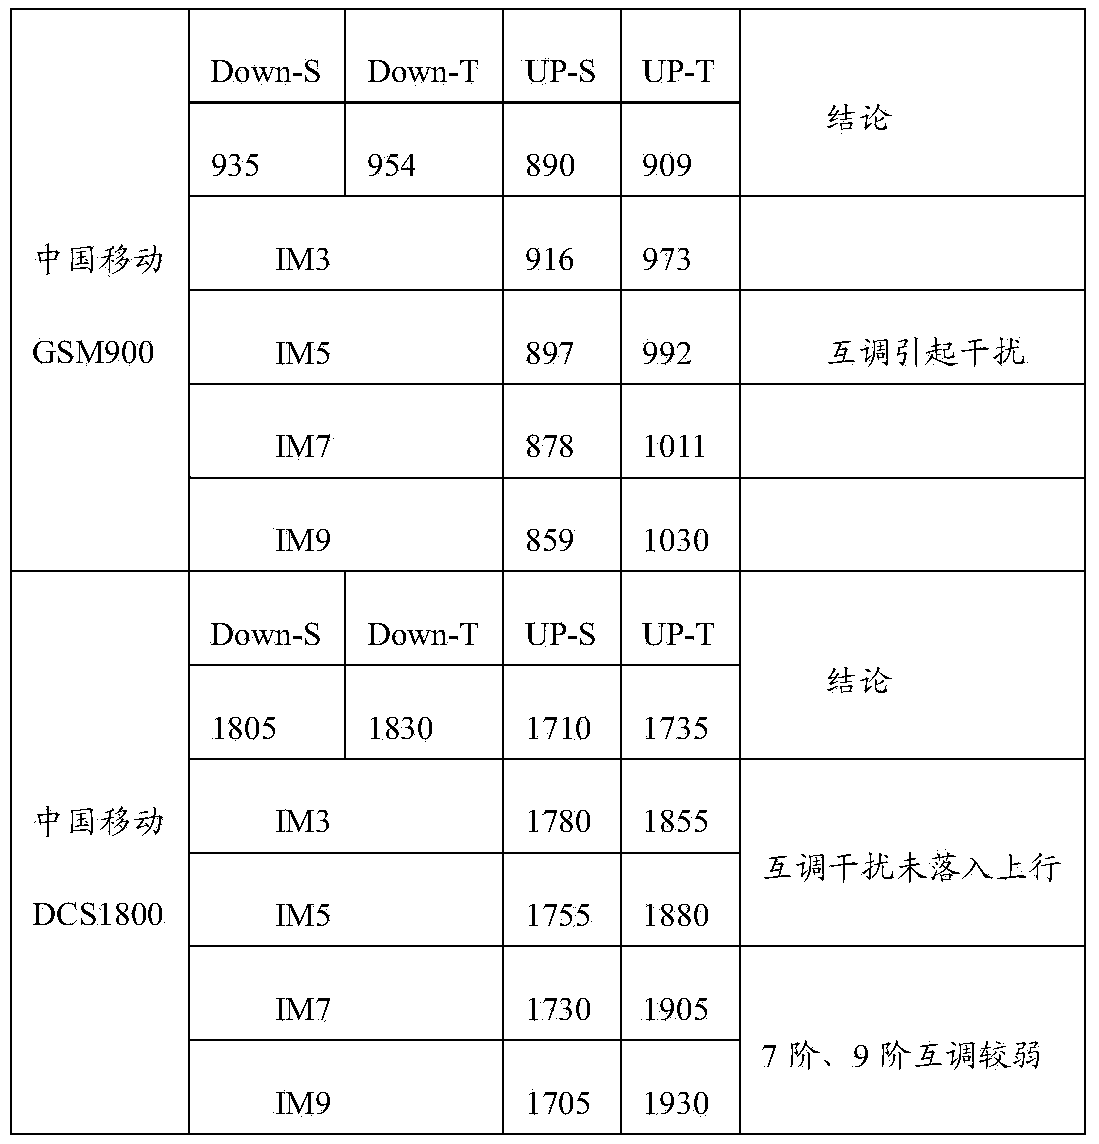 Recognition method for uplink interference types